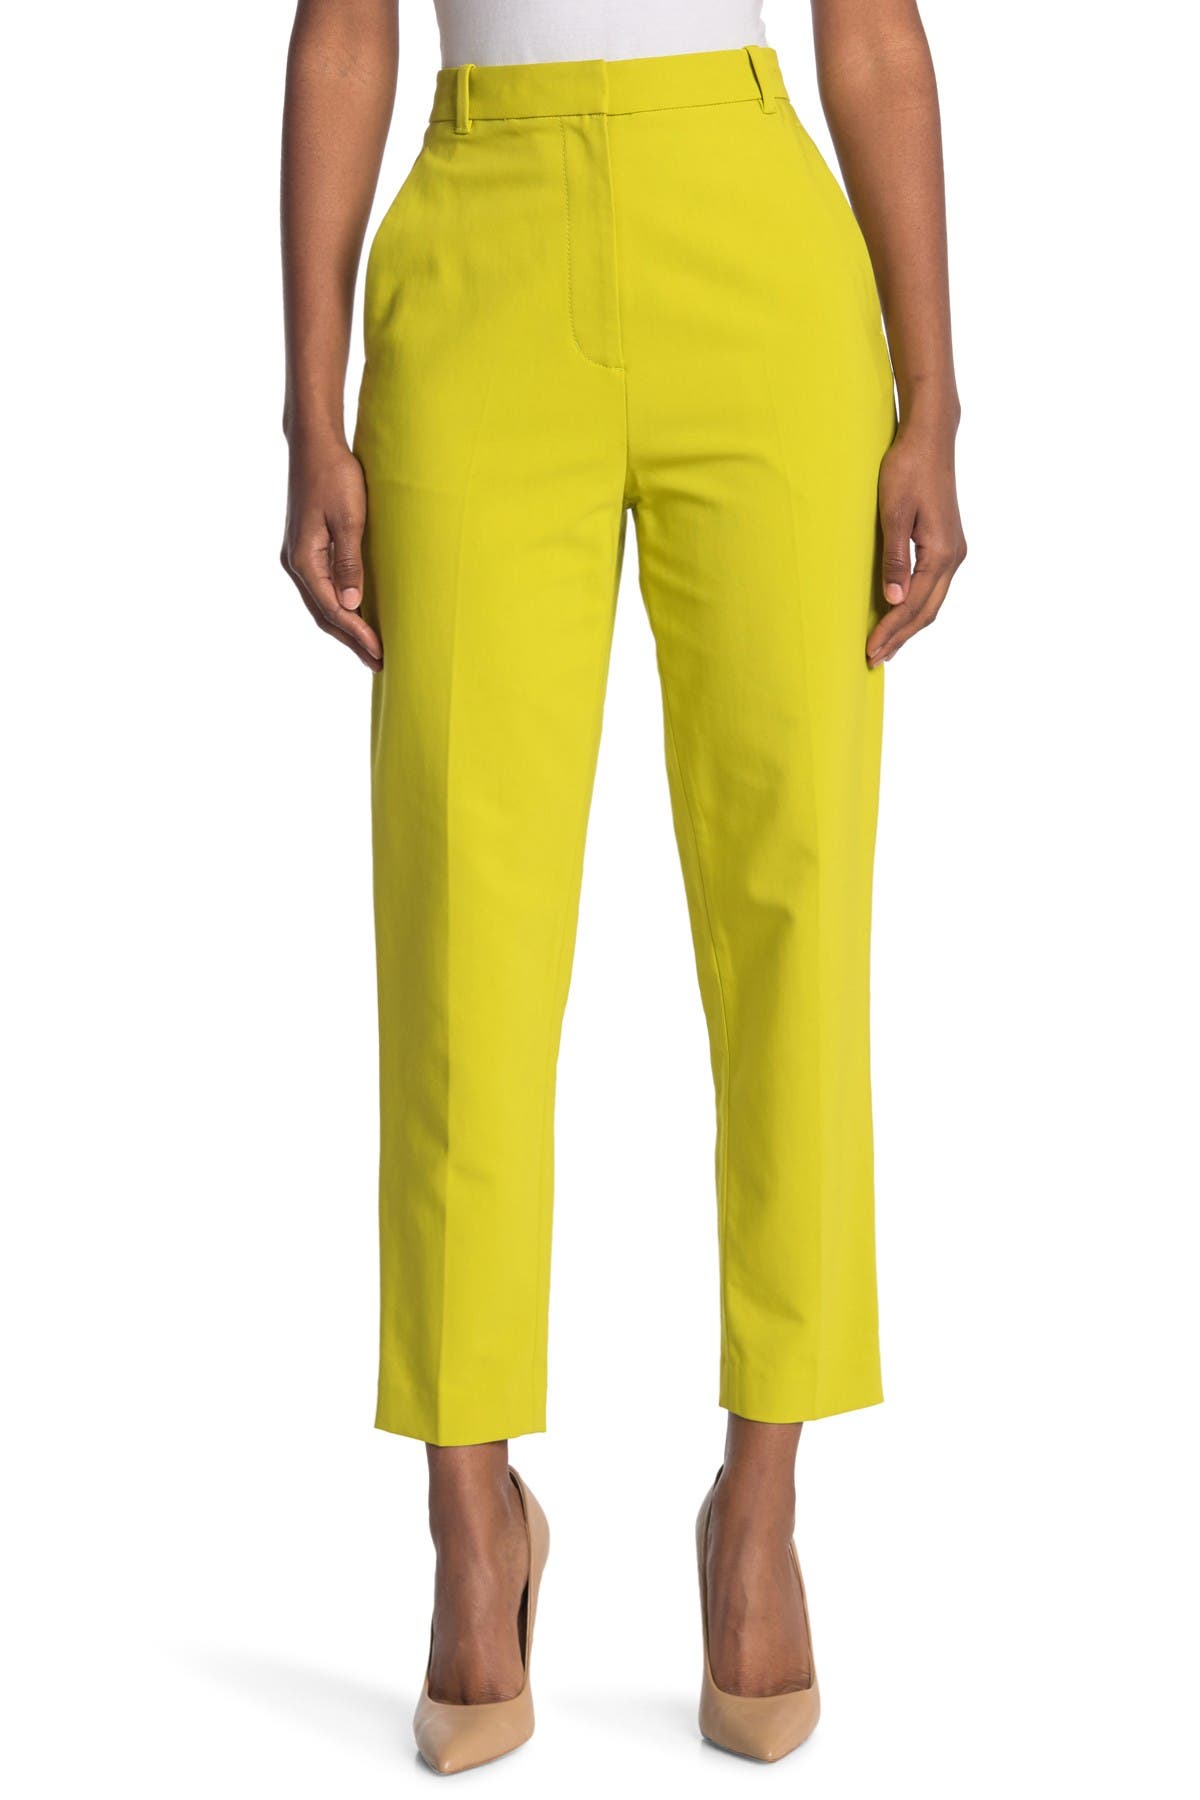 3.1 Phillip Lim / フィリップ リム Tailored Double Waistband Pants In Chartreuse